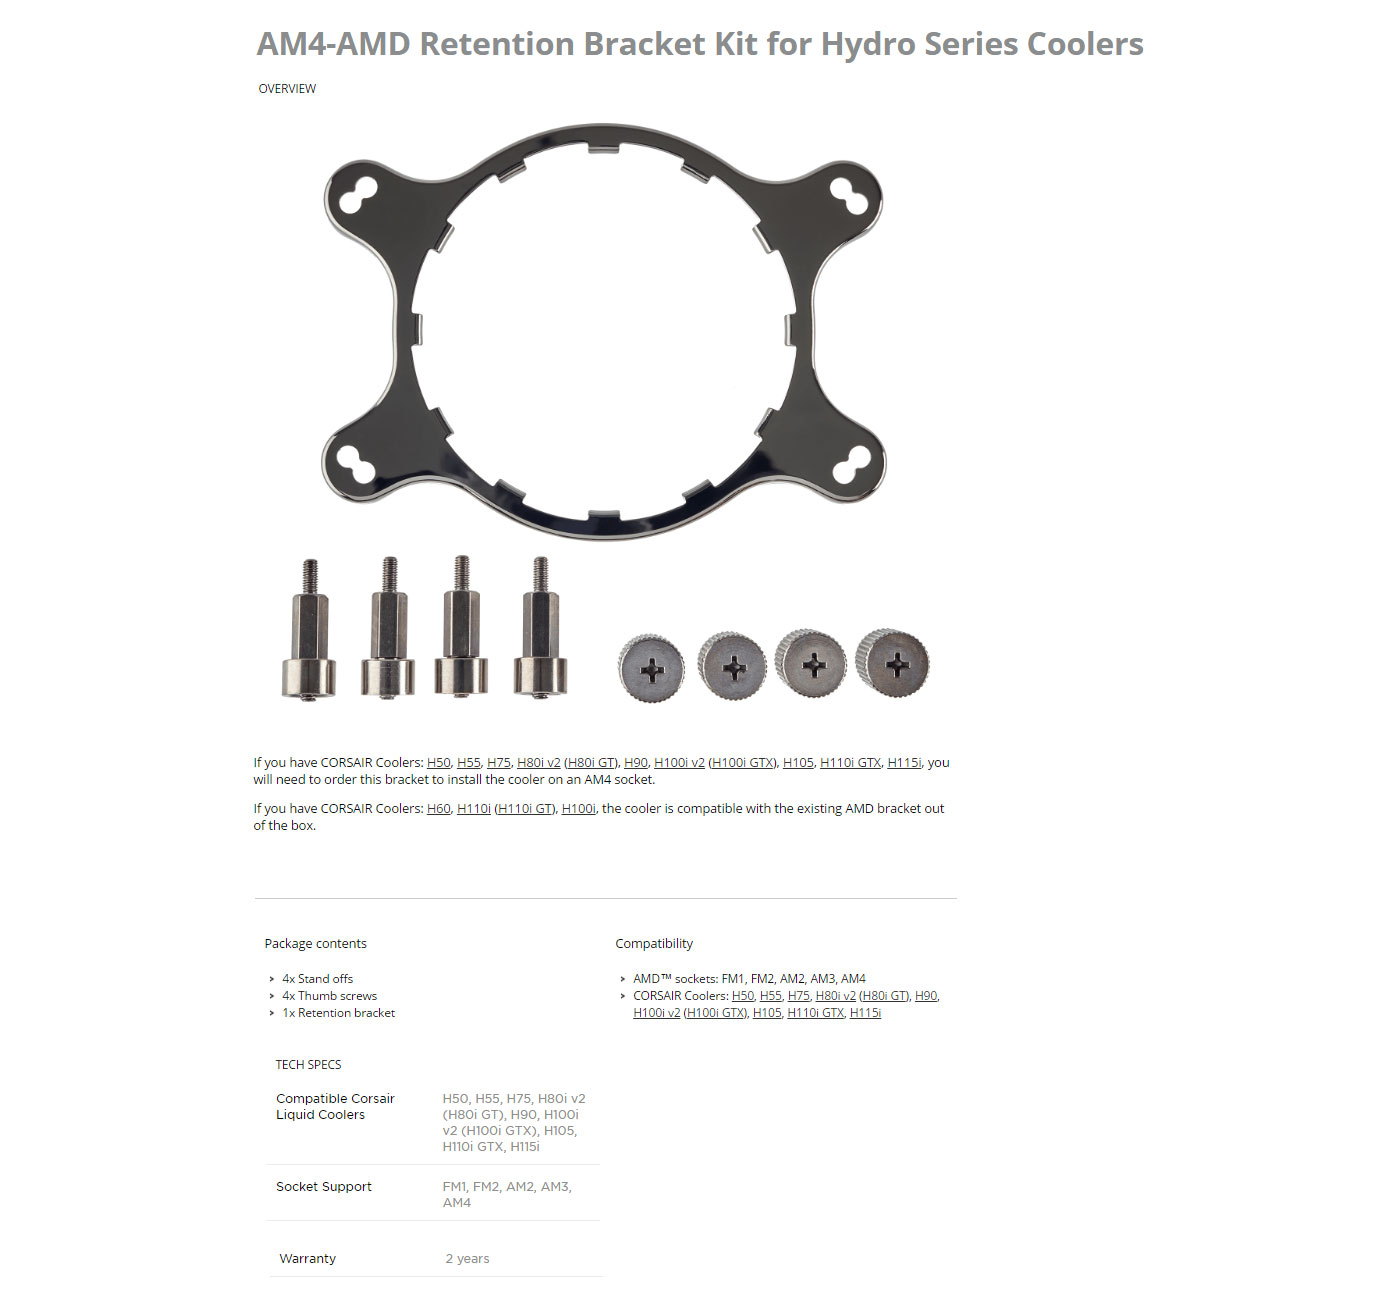 Corsair AM4-AMD Retention Bracket Kit Hydro Series Coolers features